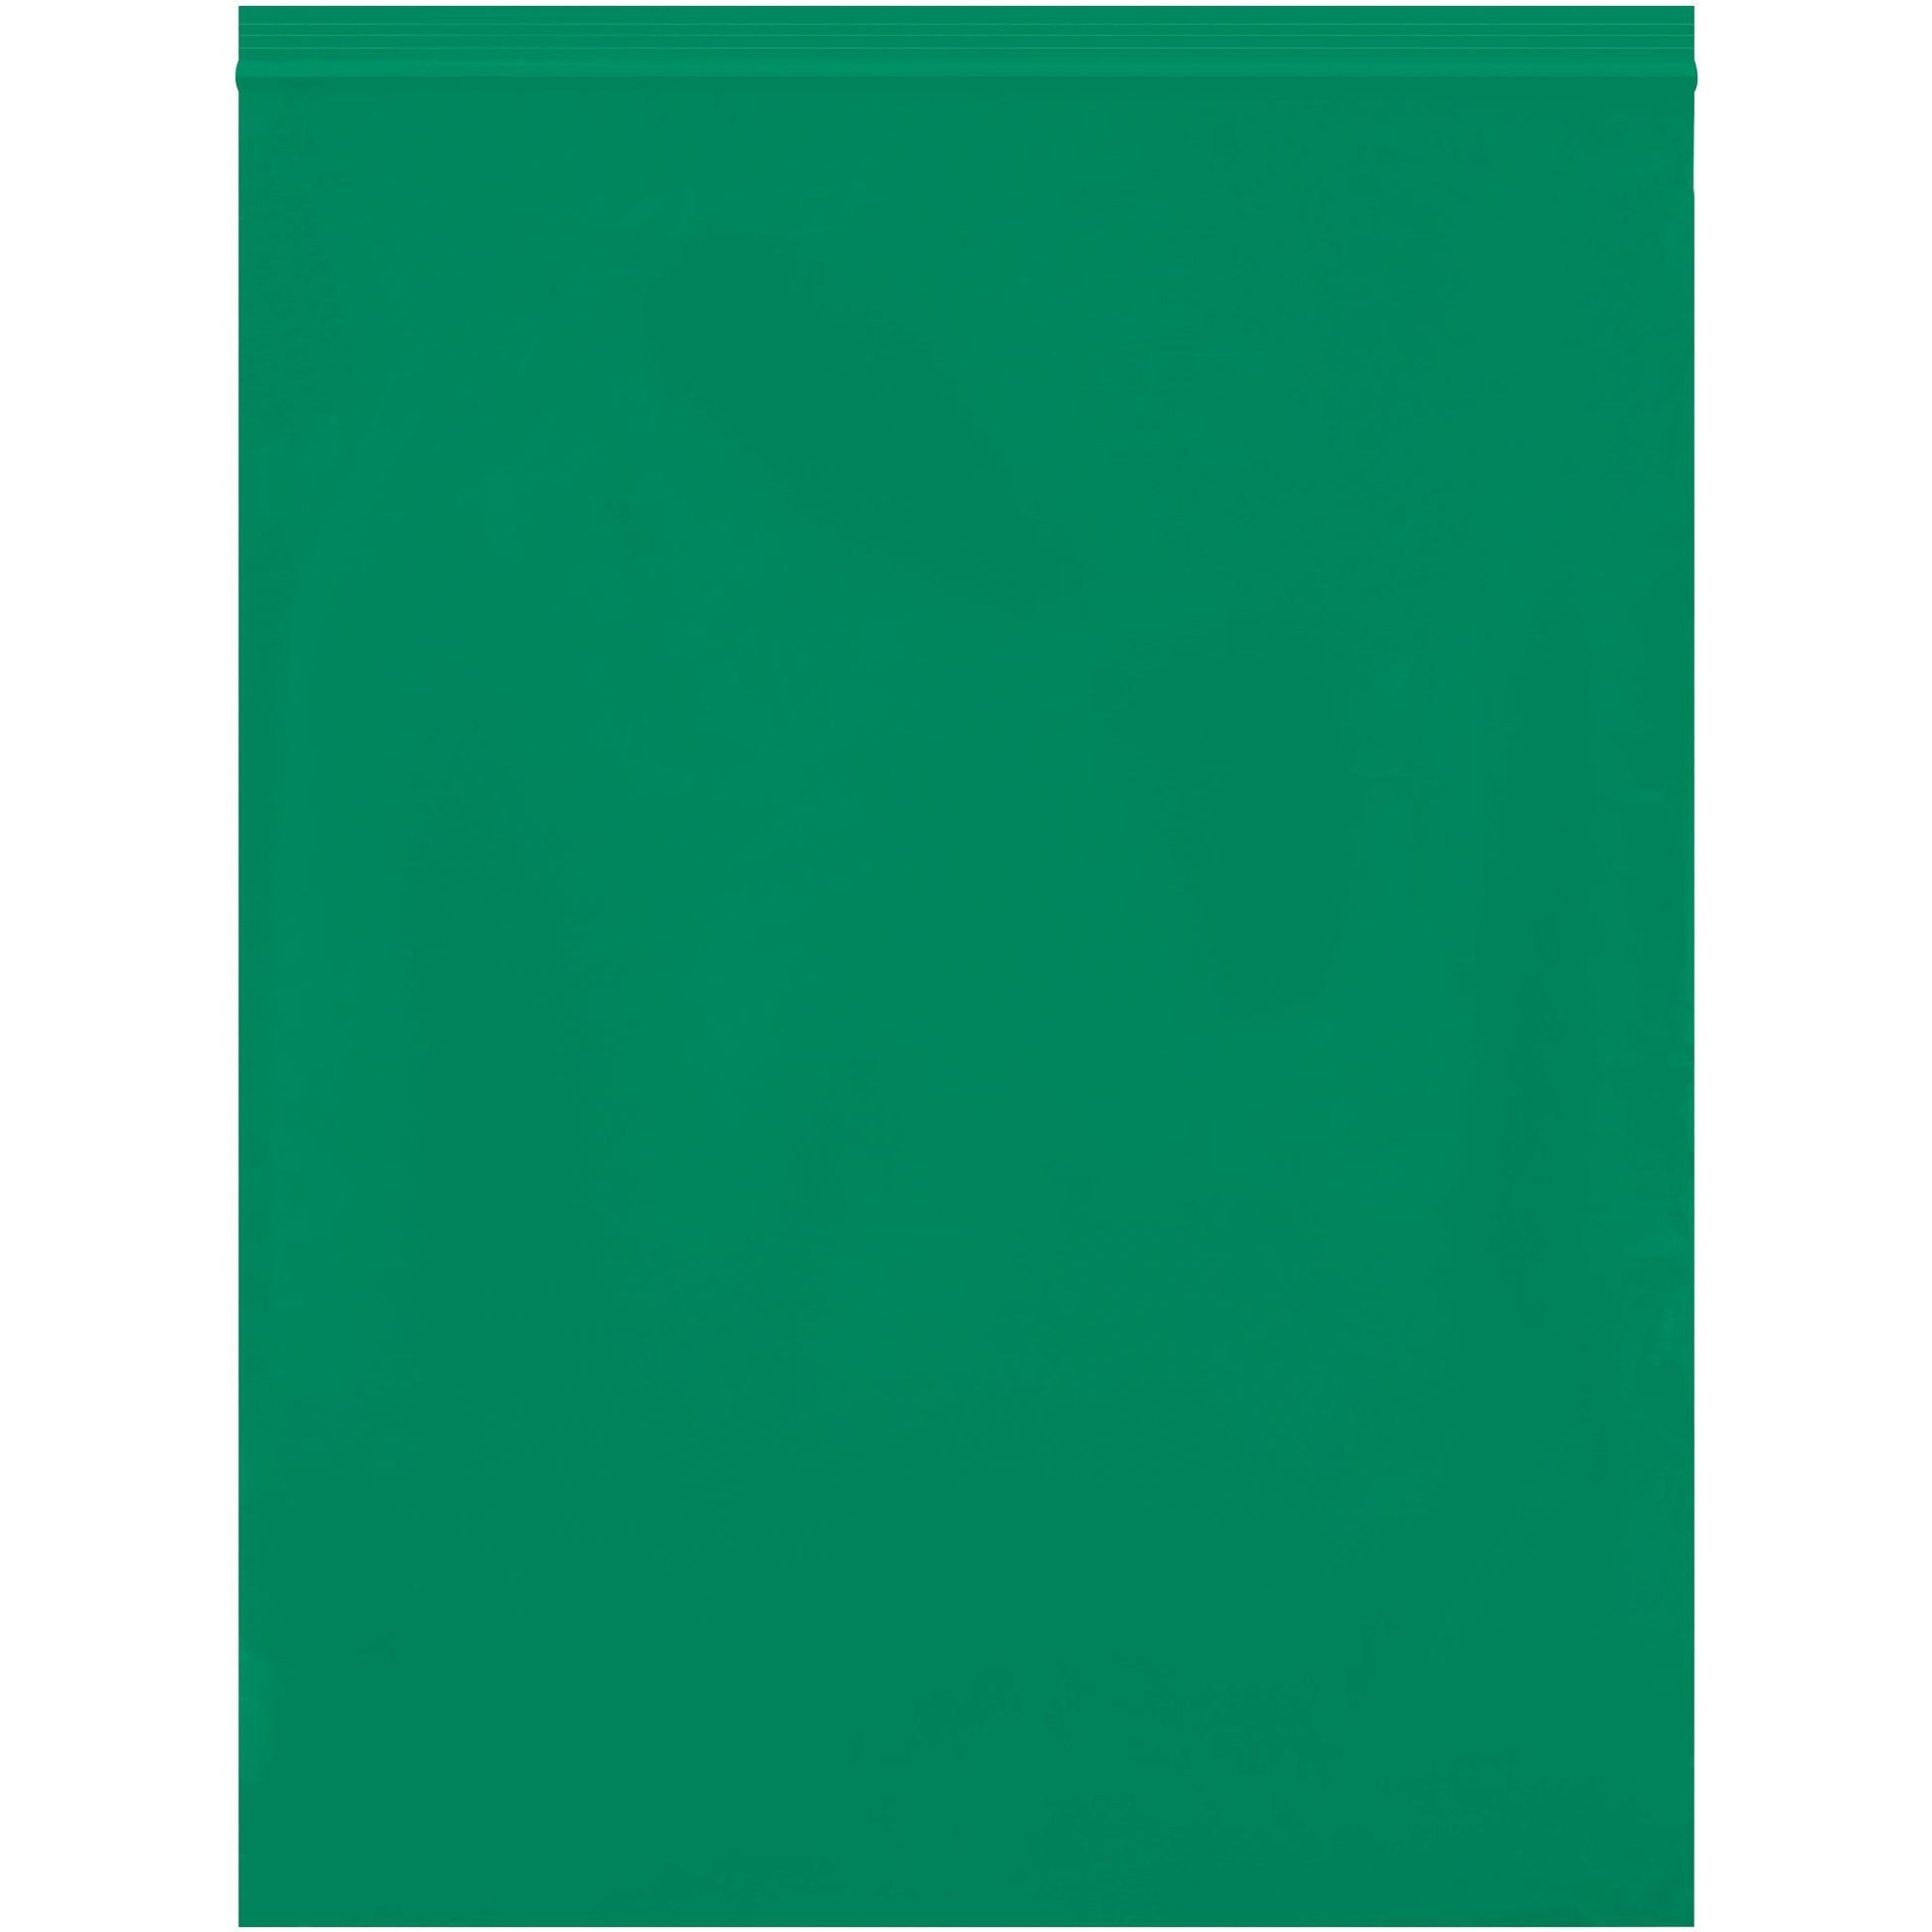 12 x 15" - 2 Mil Green Reclosable Poly Bags - PB3670G